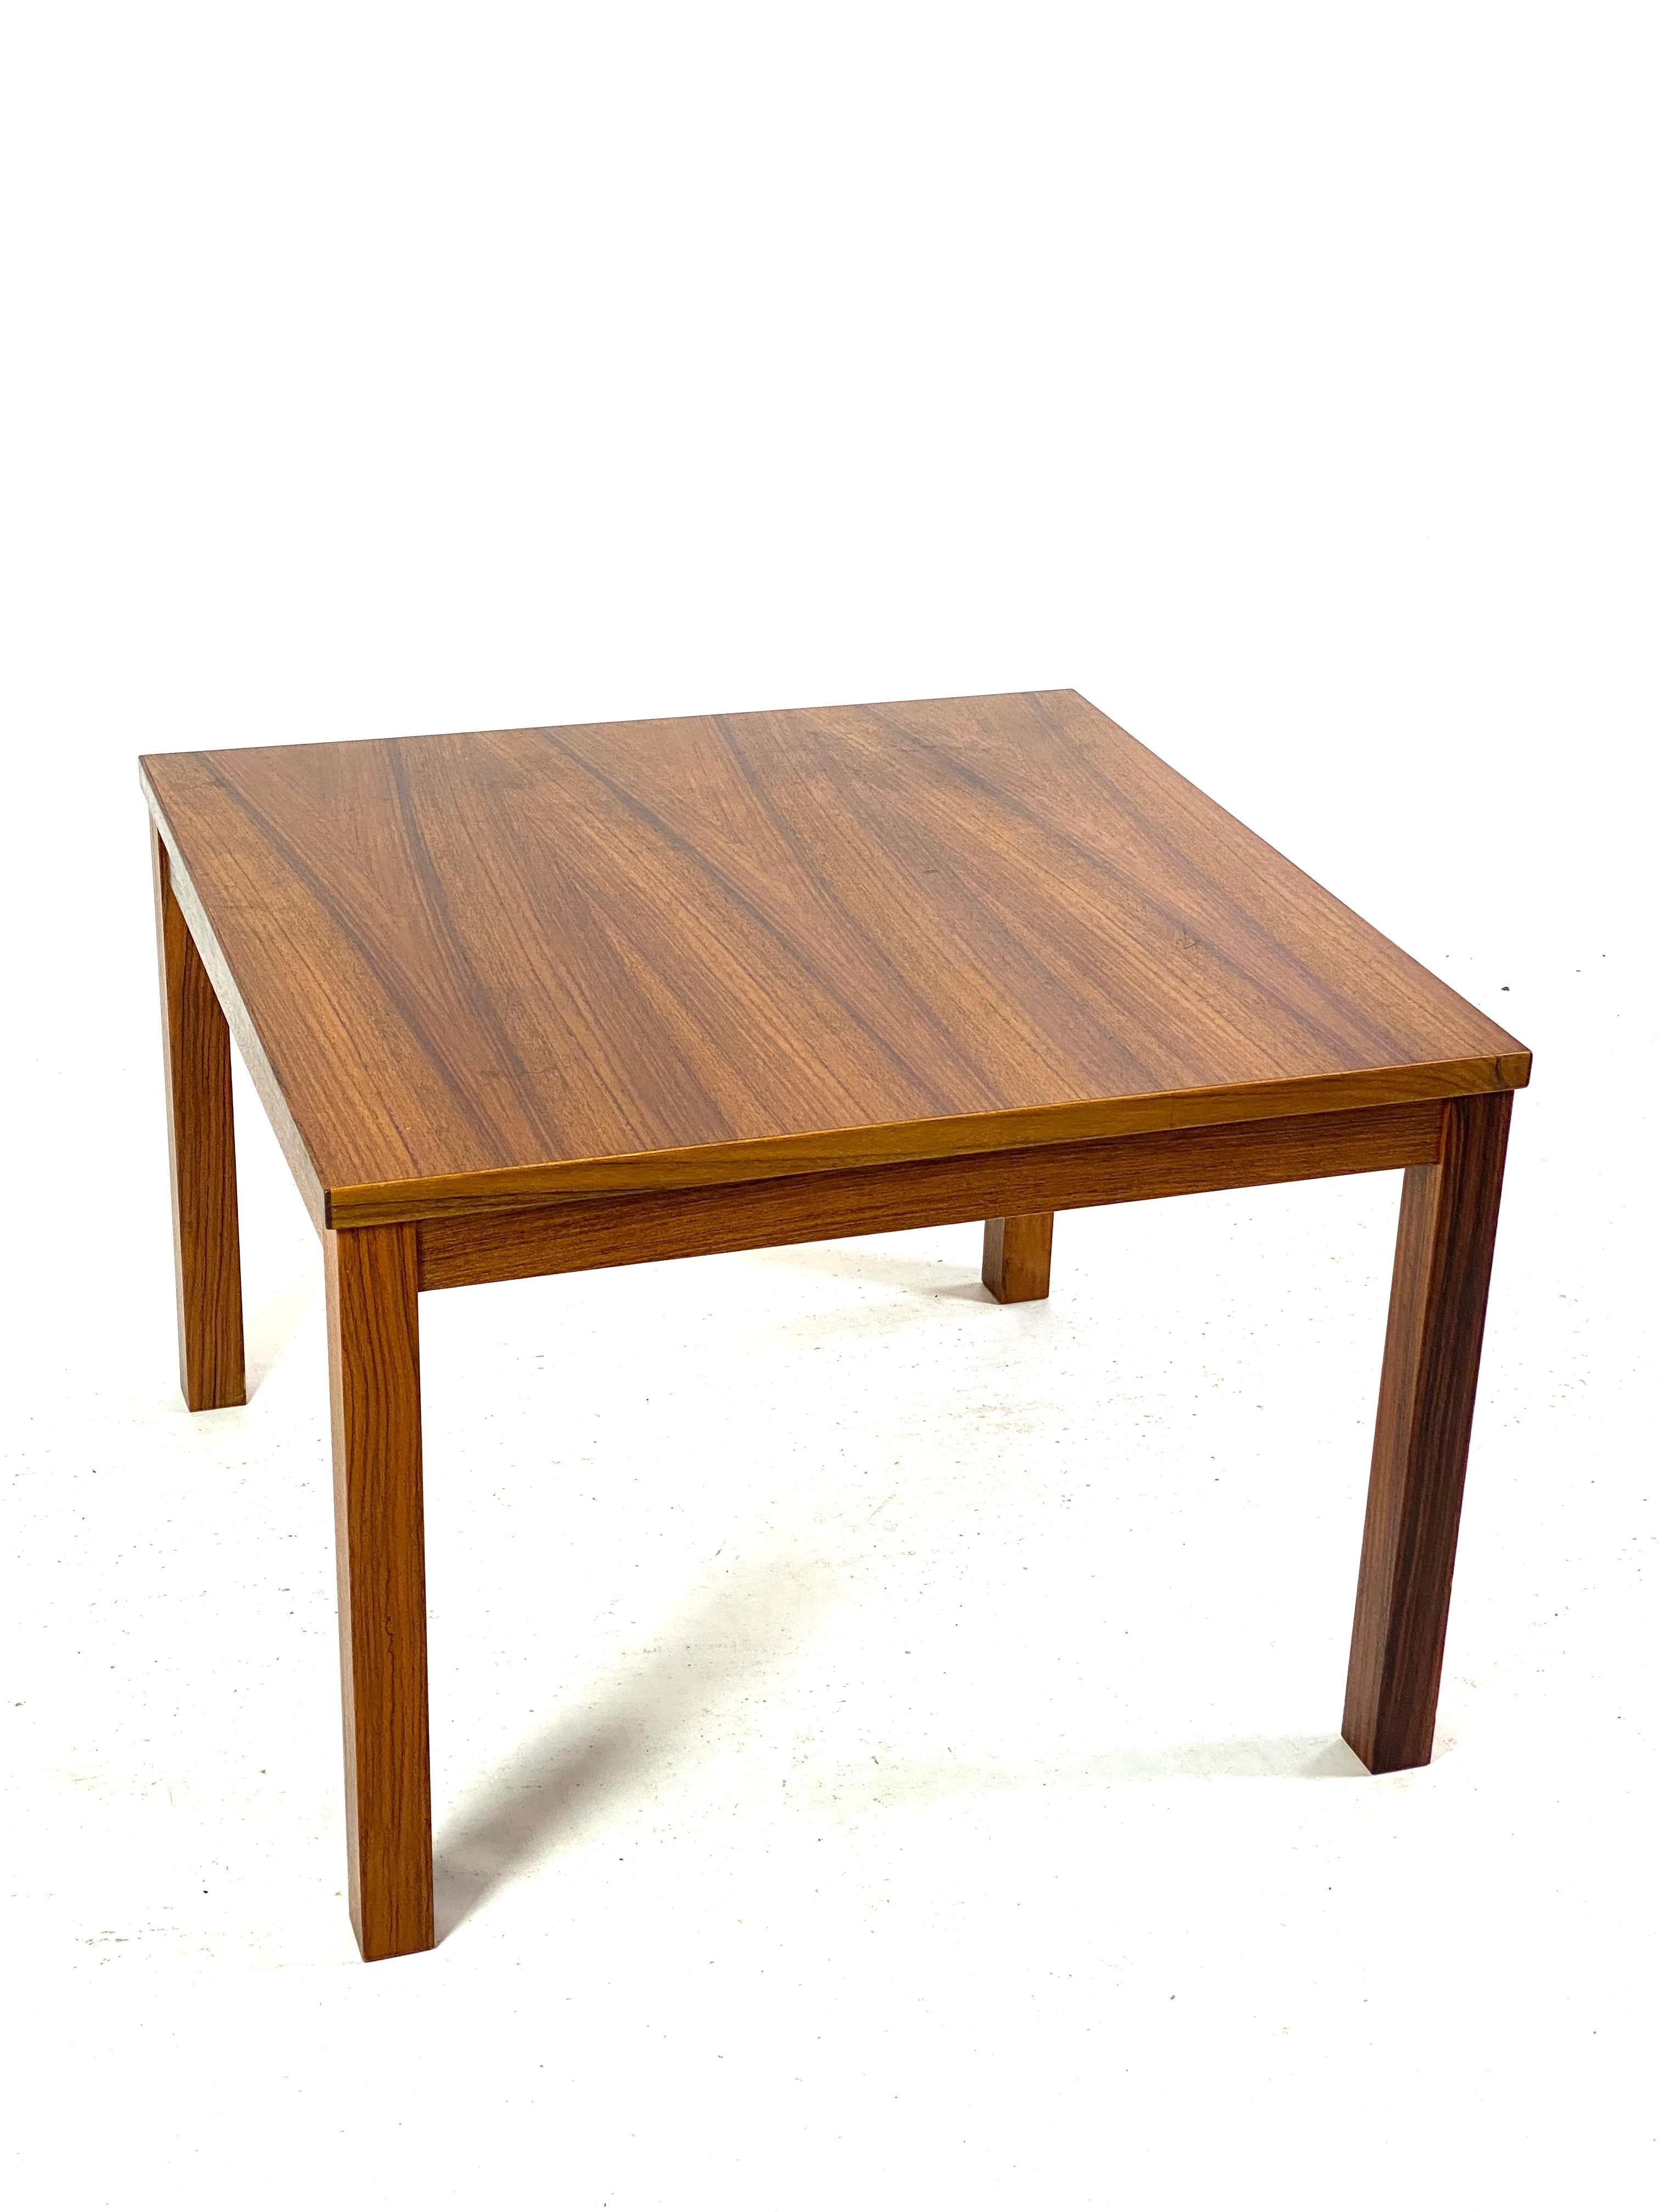 Scandinavian Modern Coffee Table in Rosewood of Danish Design from the 1960s For Sale